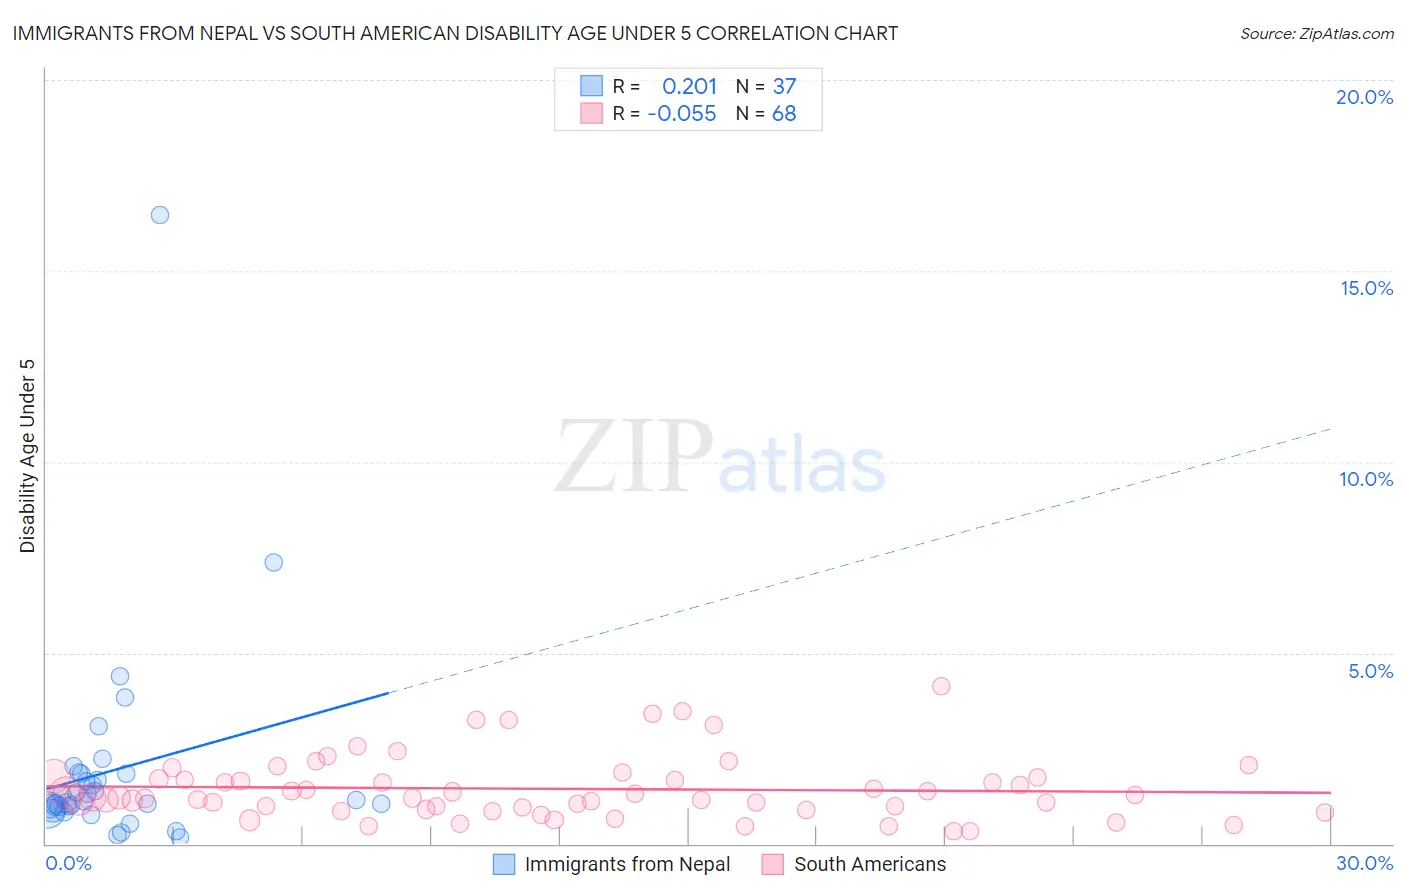 Immigrants from Nepal vs South American Disability Age Under 5